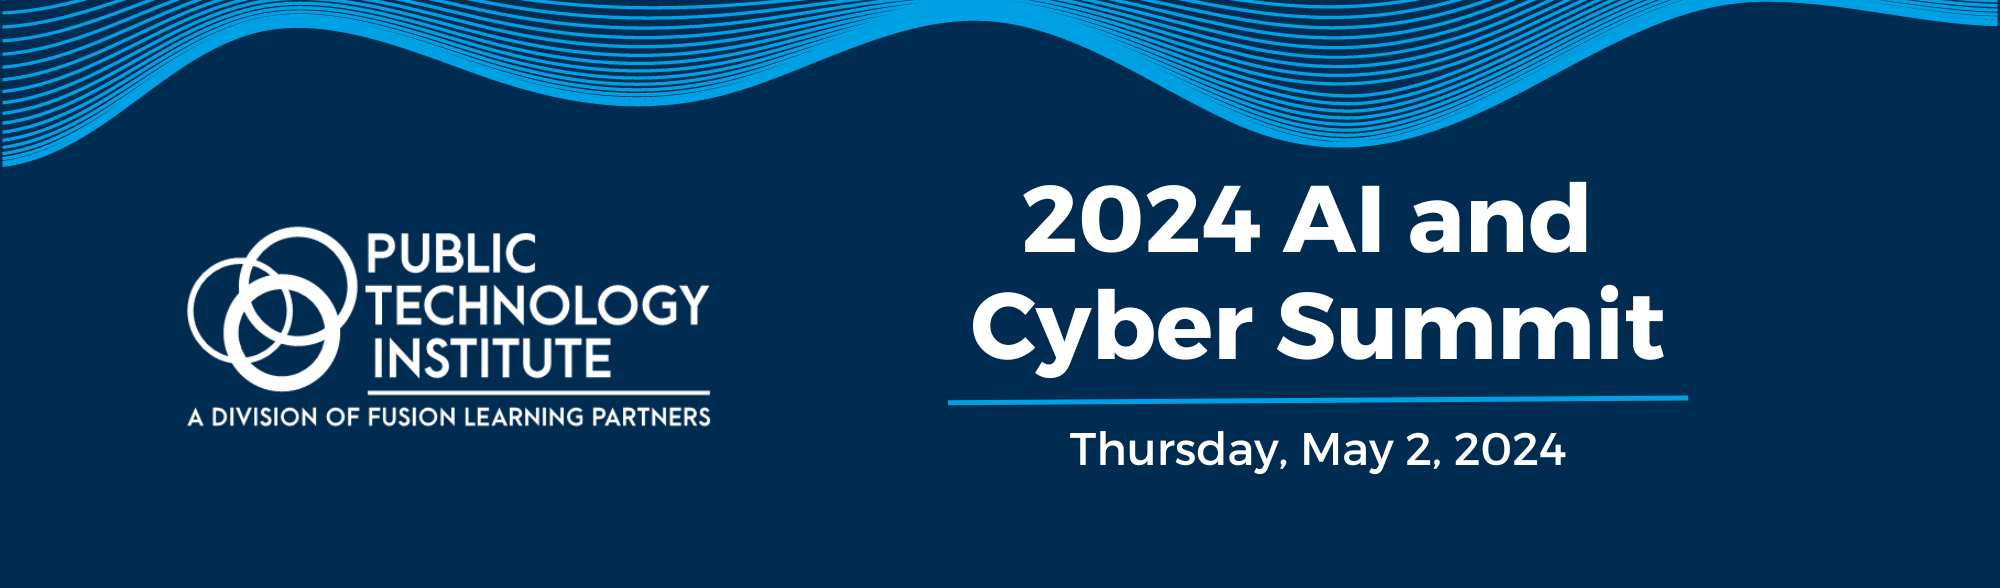 Banner with Public Technology Institute, and AI and Cyber Summit Logo, with Date Thursday, May 2, 2024